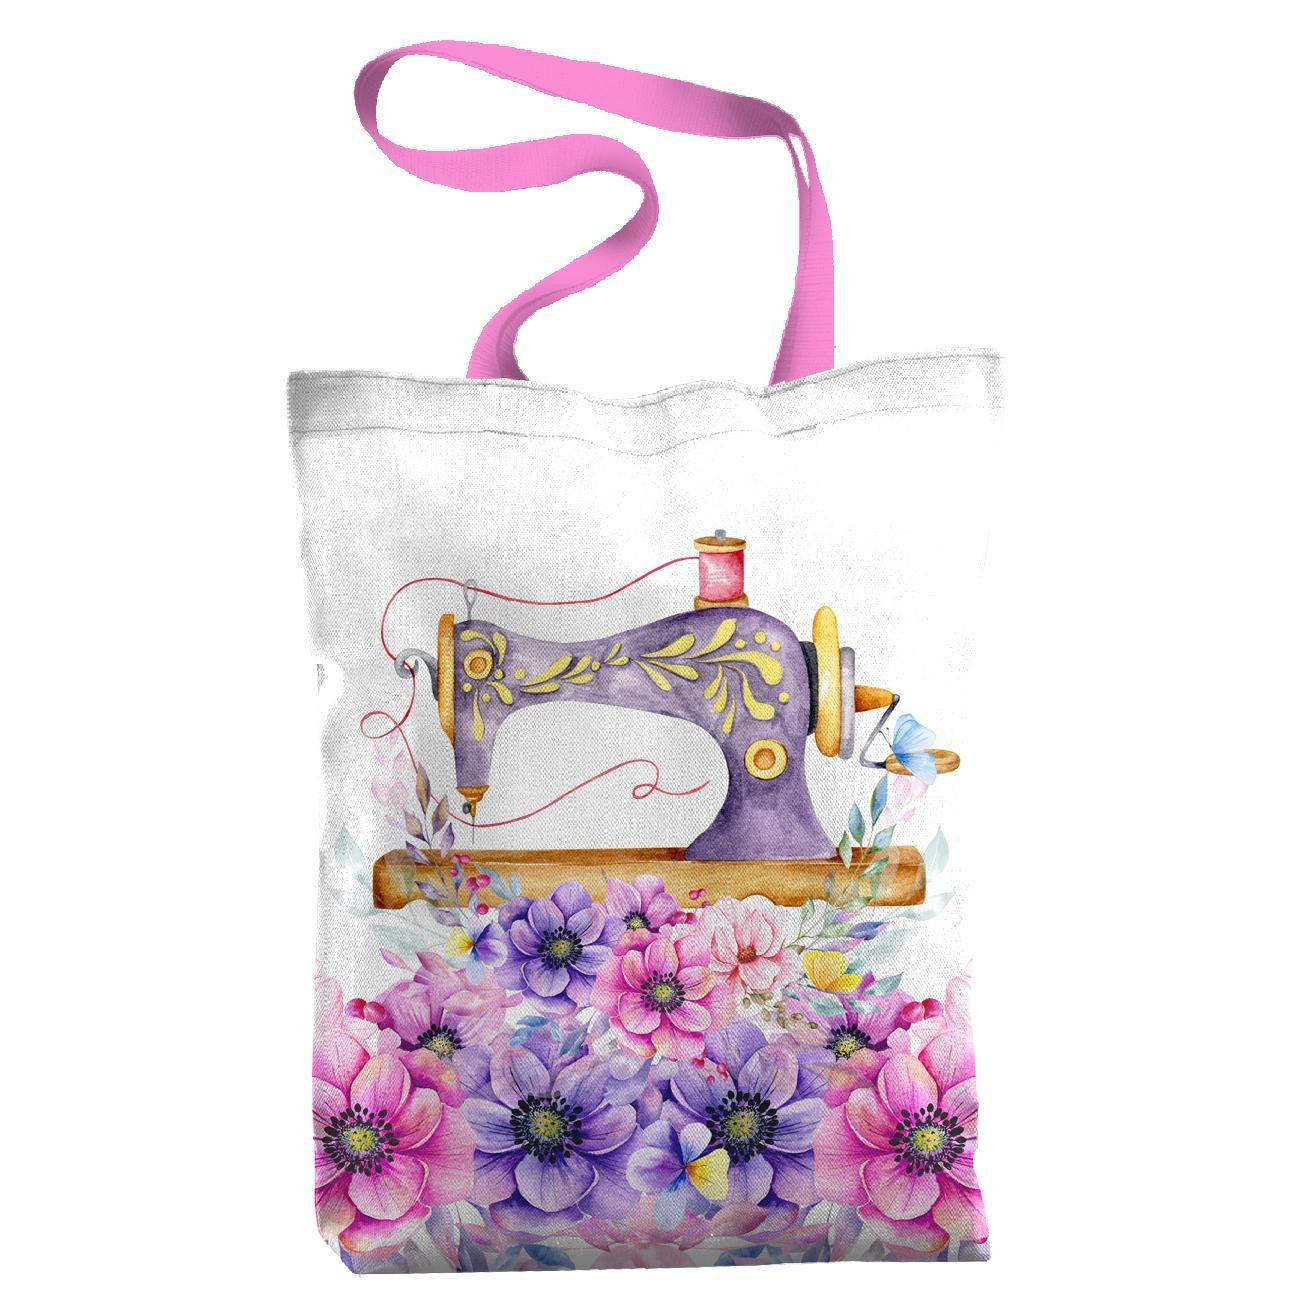 SHOPPER BAG - SEWING MACHINE AND FLOWERS - Panama 220g - sewing set